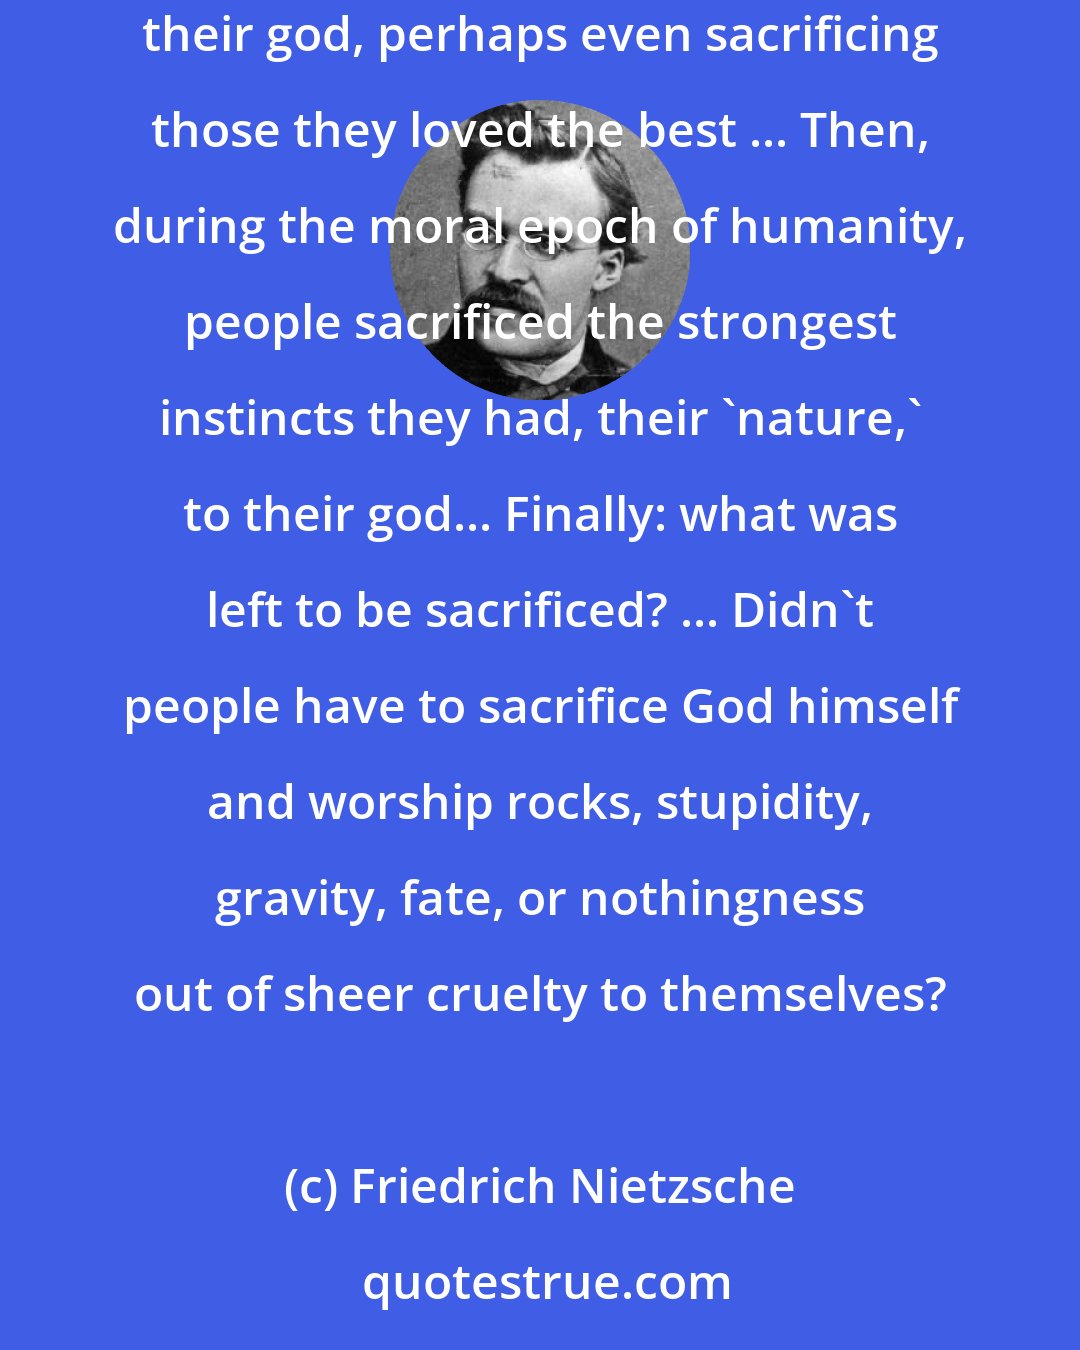 Friedrich Nietzsche: There is a great ladder of religious cruelty, and, of its many rungs, three are the most important. People used to make human sacrifices to their god, perhaps even sacrificing those they loved the best ... Then, during the moral epoch of humanity, people sacrificed the strongest instincts they had, their 'nature,' to their god... Finally: what was left to be sacrificed? ... Didn't people have to sacrifice God himself and worship rocks, stupidity, gravity, fate, or nothingness out of sheer cruelty to themselves?